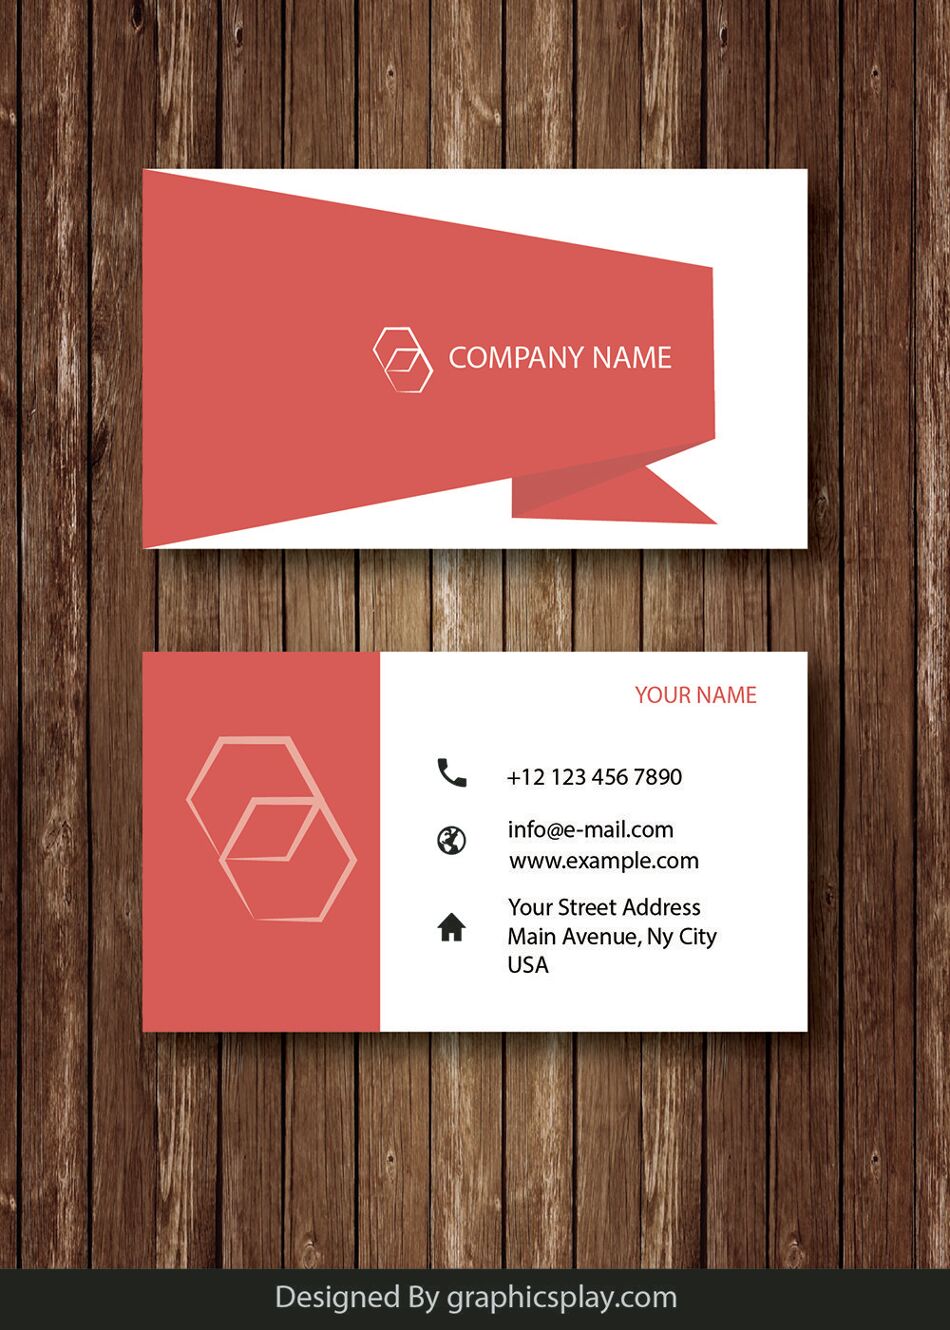 Business Card Design Vector Template - ID 1689 1